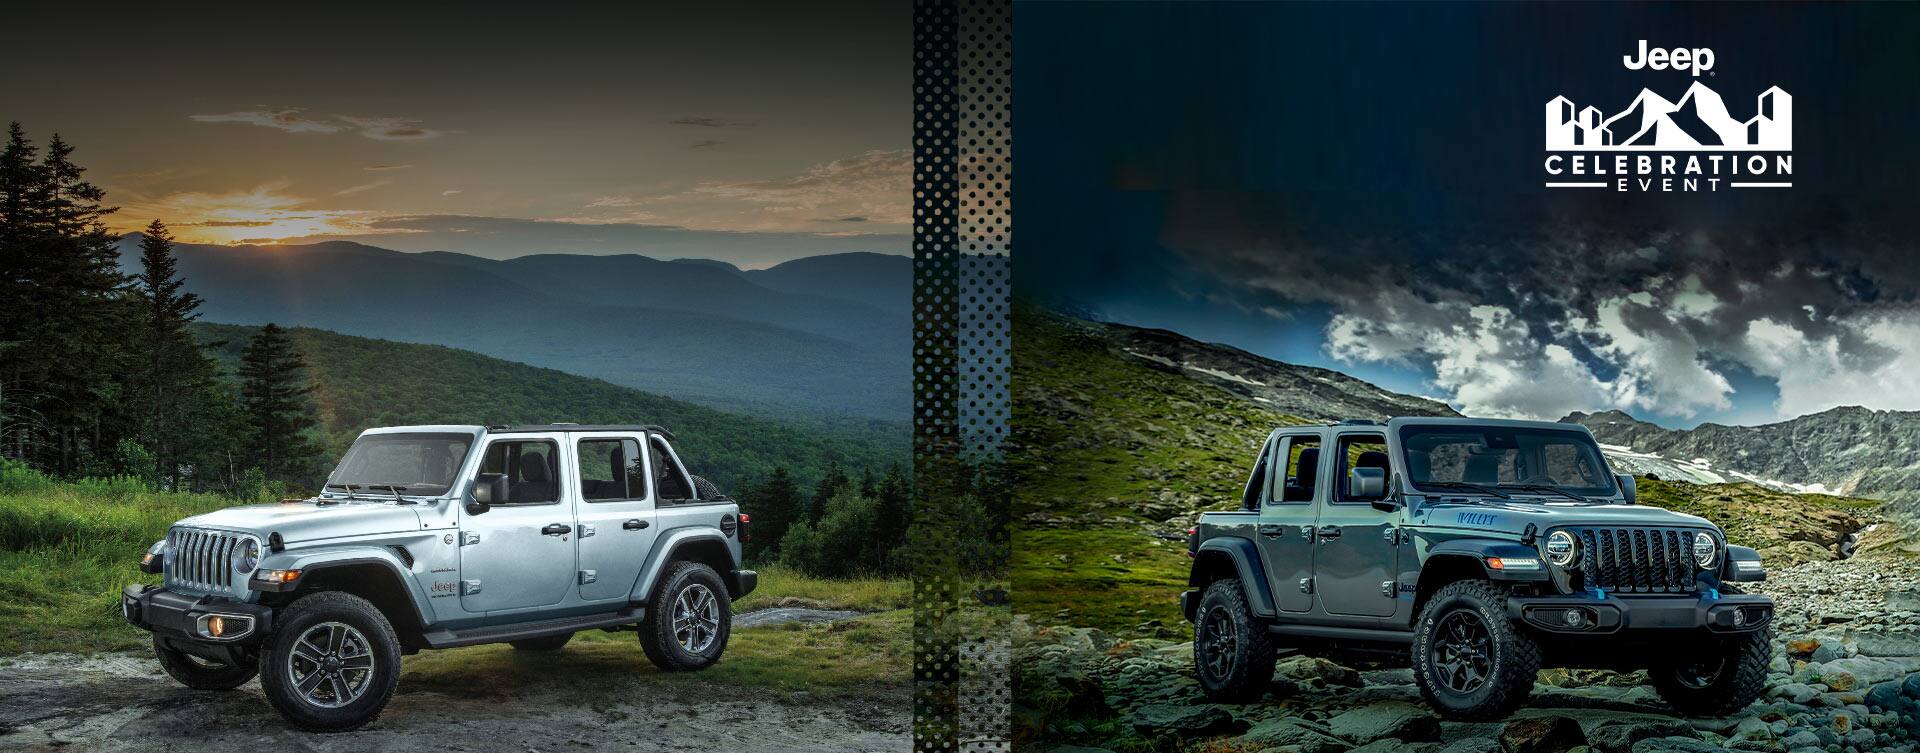 A split-screen featuring two Wrangler models. On the left, a silver 2023 Jeep Wrangler Unlimited Sahara parked on a grassy trail off-road in a clearing at sunset, with mountains in the background. On the right, a gray 2023 Jeep Wrangler Unlimited Willy's 4xe parked on a rocky trail off-road, with mountains and storm clouds in the background. The Jeep Celebration Event.